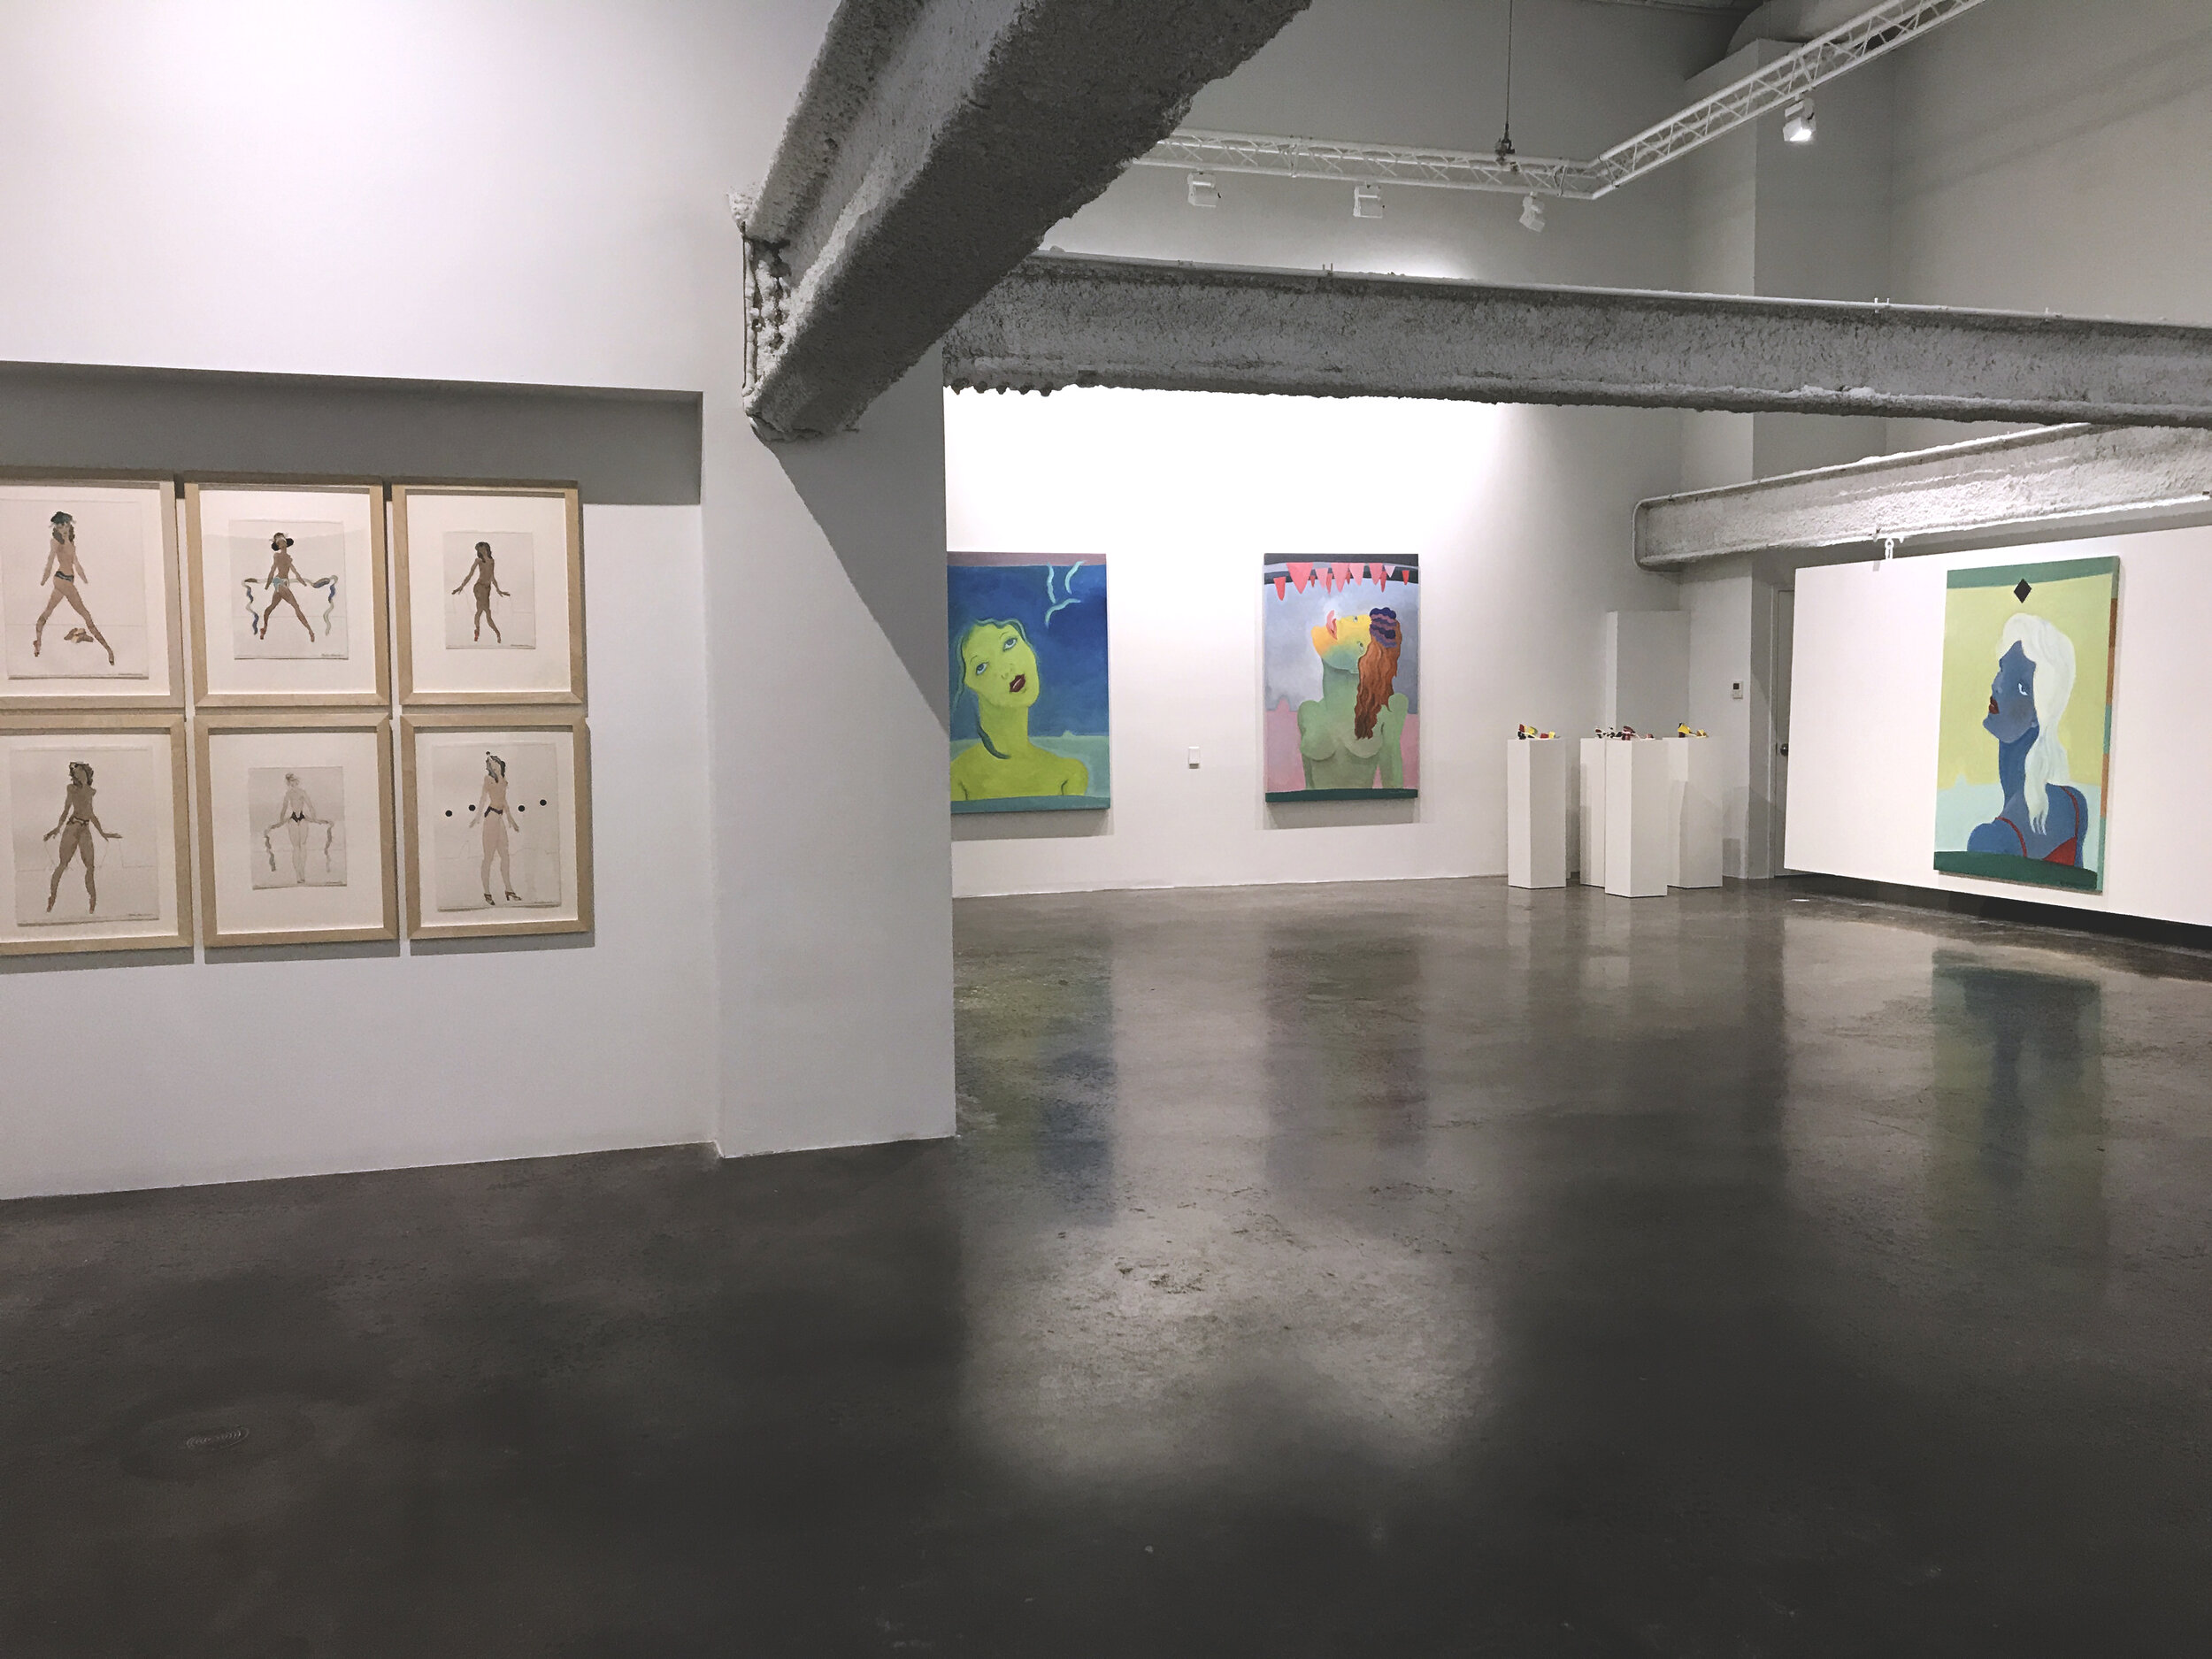  Foreground/left wall:  Womangirls  series (early 70’s)  Ink and watercolor on paper, 16” x 12”  Far wall, left to right:  Sweet Sue Dreaming  (2020),  The Gift of Tongues  (2019),  The Red Dress  (2020)  Oil on canvas, 72” x 48”  